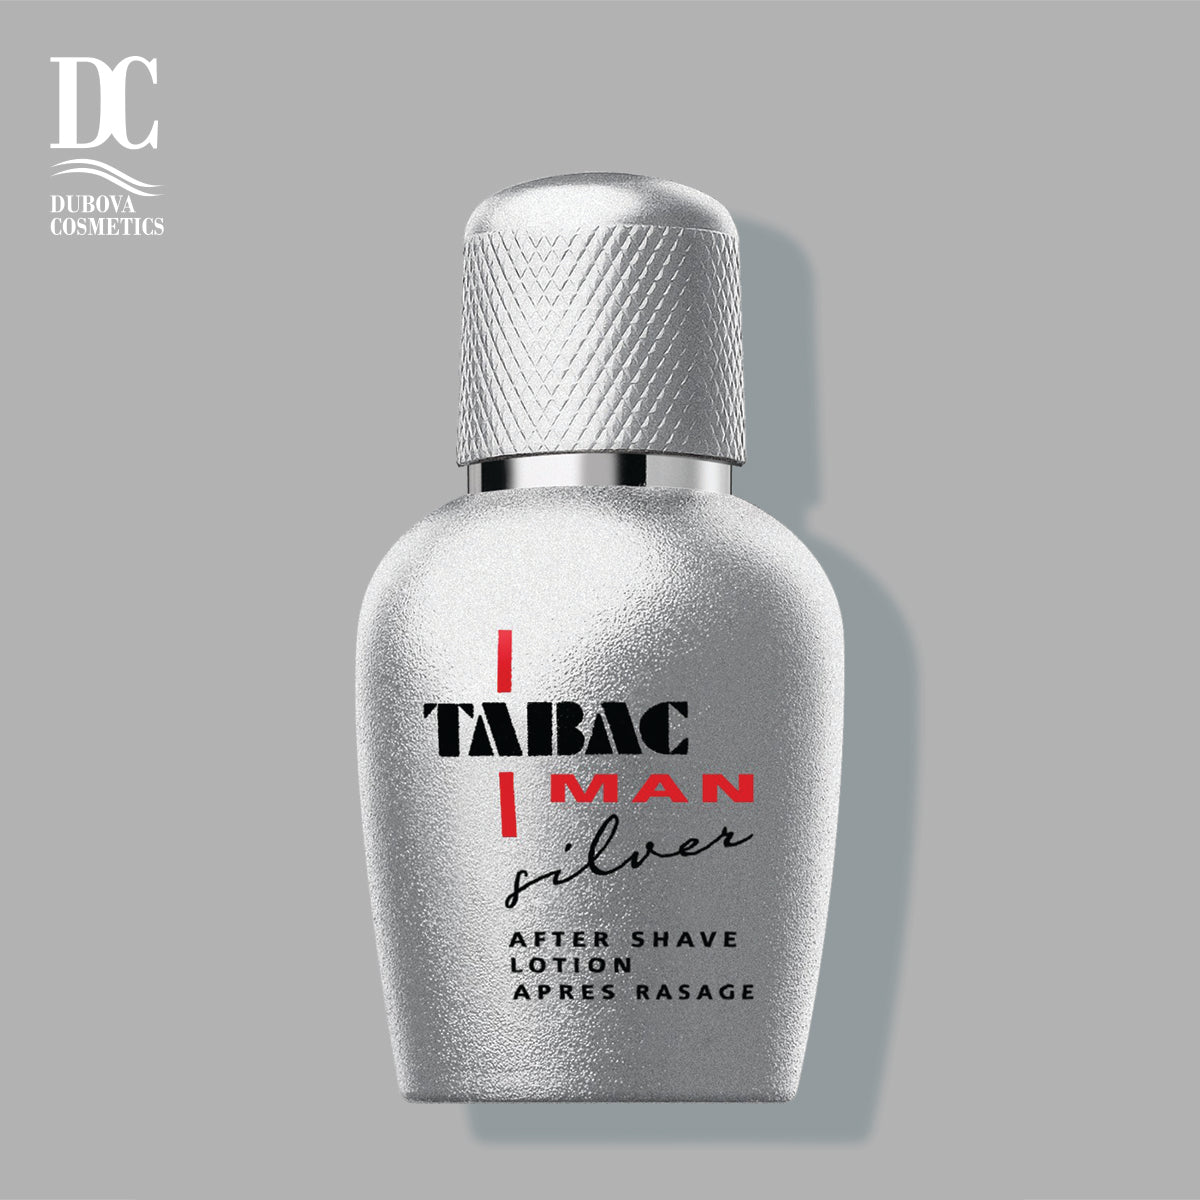 Tabac Man Silver After Shave Lotion 50 ml